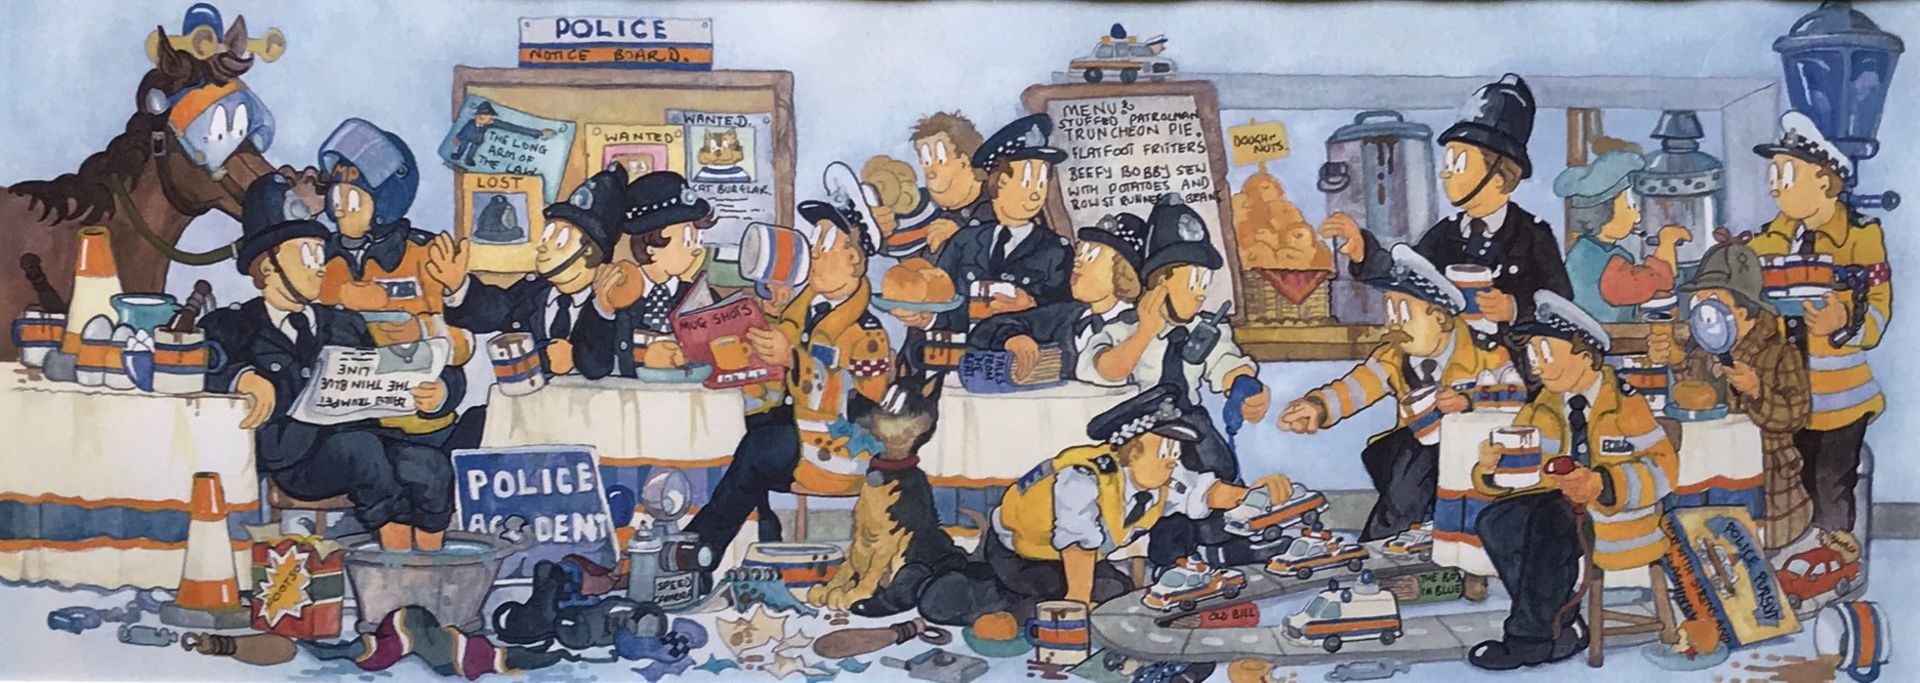 Humorous Police Cartoon Print Within A Hand Drawn/Painted Mount